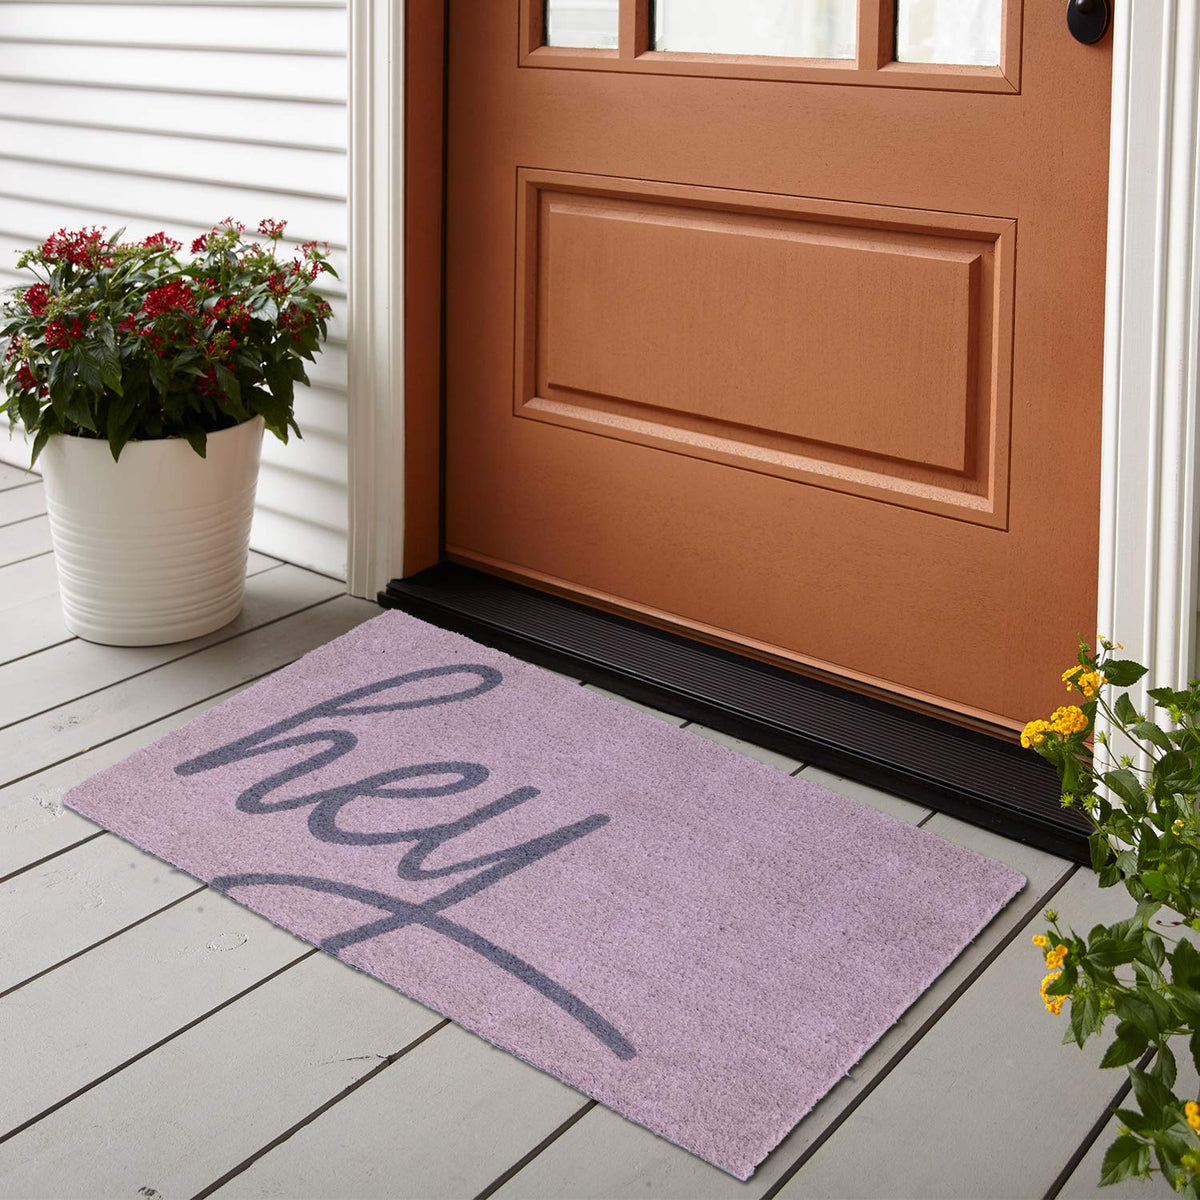 "Hey" Printed colourful Natural Coir Door mat with PVC backing - OnlyMat